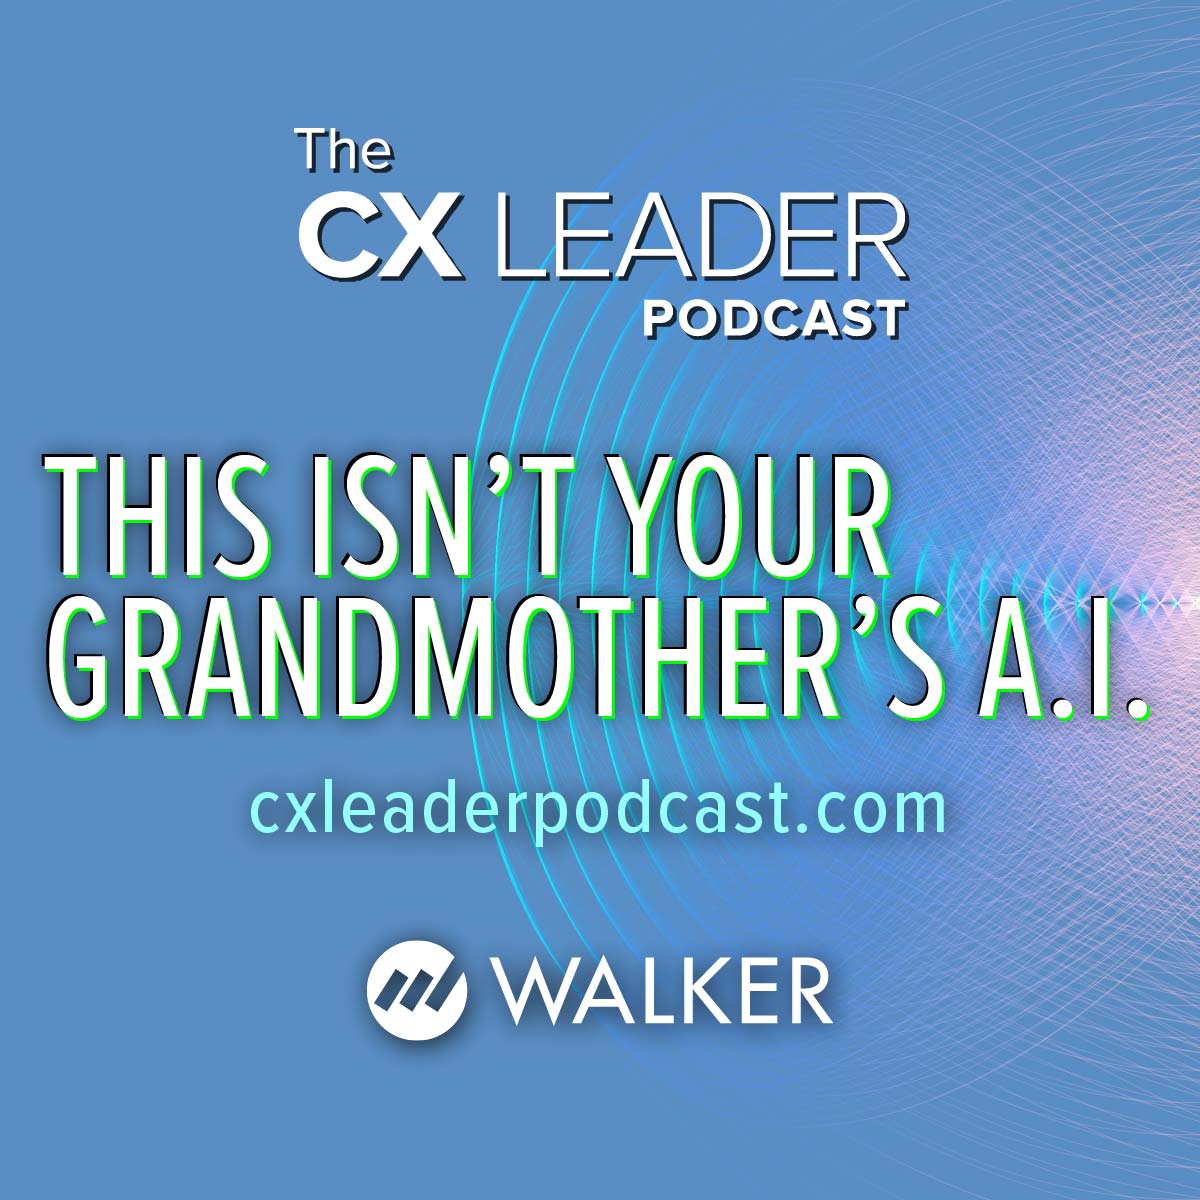 It’s not your grandmother’s A.I.